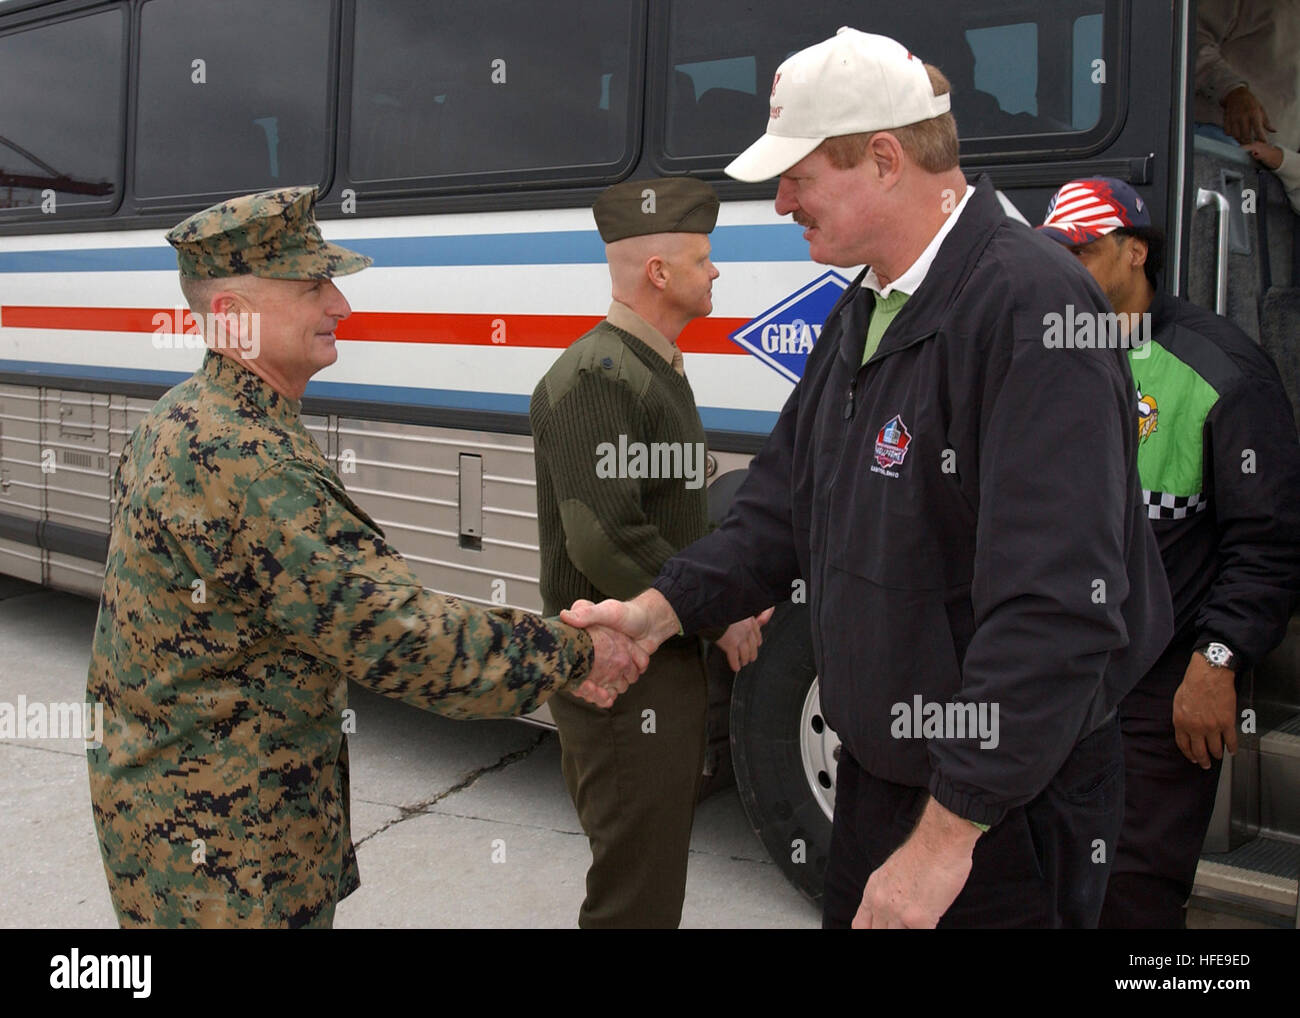 050204-N-0874H-006 Blount Island, Jacksonville, Fla. (Feb. 4, 2005) - Commanding Officer, Blount Island Command, Col. Carl D. Matter, left, greets National Football League (NFL) Hall of Famer, Ted Hendricks, on board Blount Island, Fla. Hendricks played for the Baltimore Colts (1969-1973), Green Bay Packers (1973) and Oakland Raiders (1975-1983). Twenty-two NFL Hall of Fame players visited the Marines and Sailors assigned to Blount Island Command to show their support for the local Sailors and Marines as part of Super Bowl XXXIX kick-off festivities. U.S. Navy photo by Photographer's Mate 2nd  Stock Photo